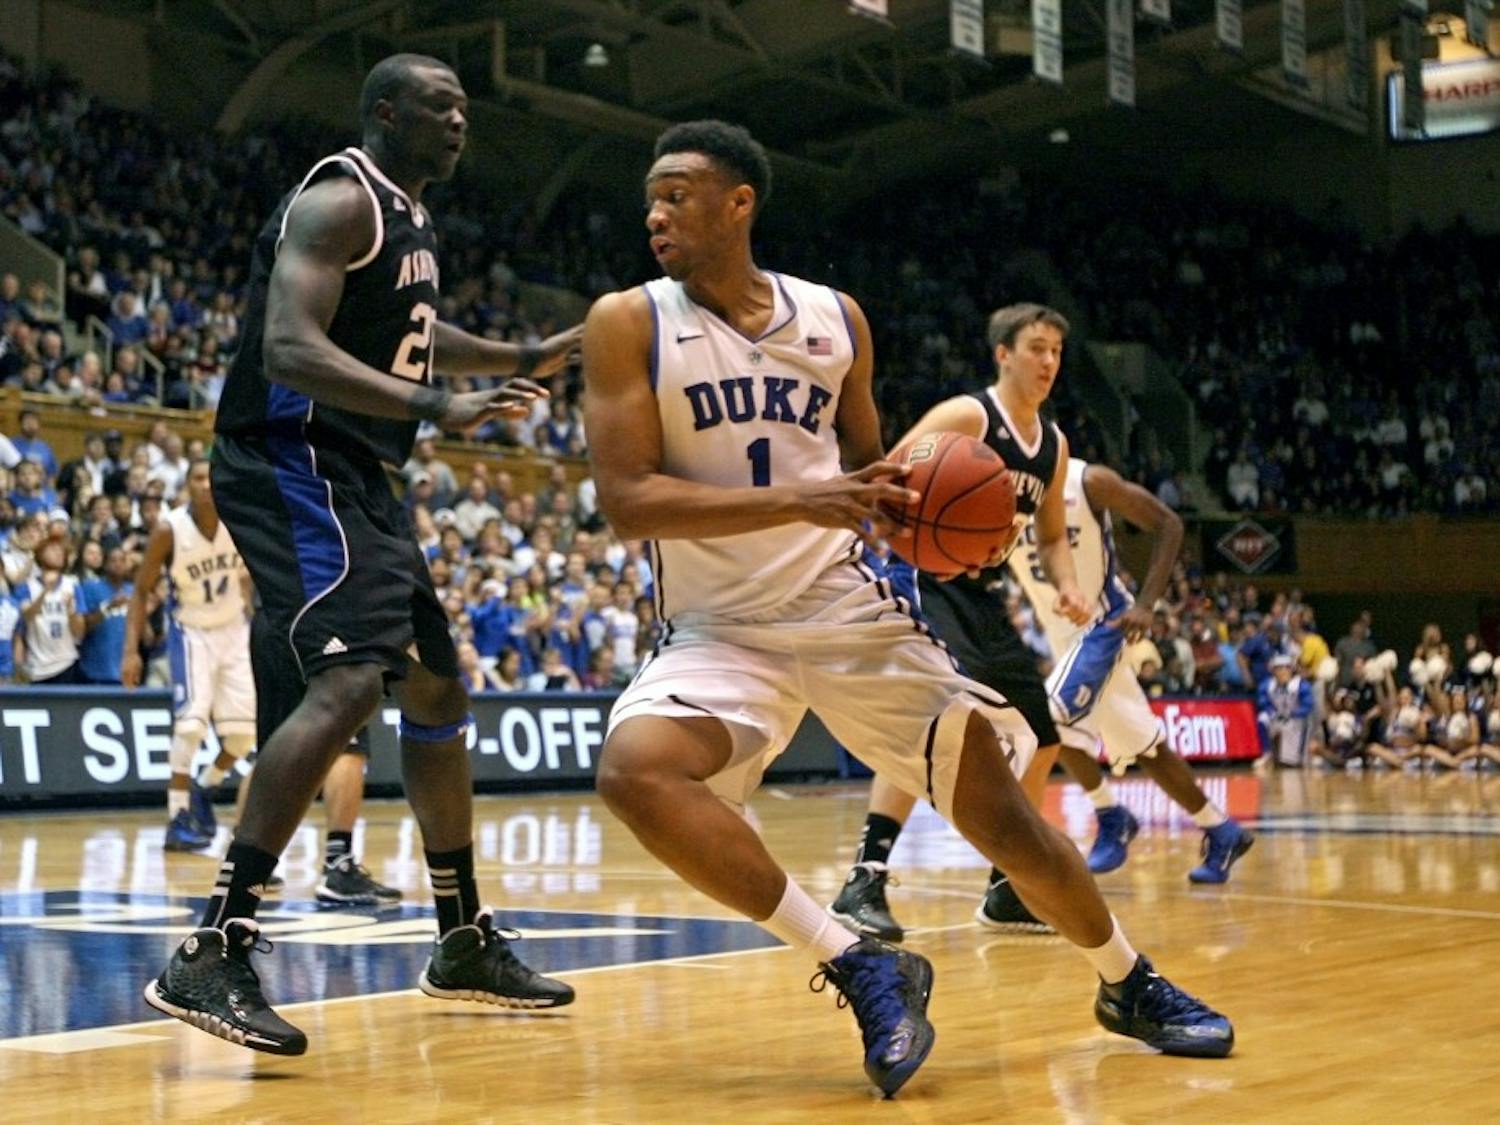 Freshman Jabari Parker led the way for Duke with 10 rebounds as the Blue Devils won the battle on the glass 42-28i Monday's win against UNC-Asheville.